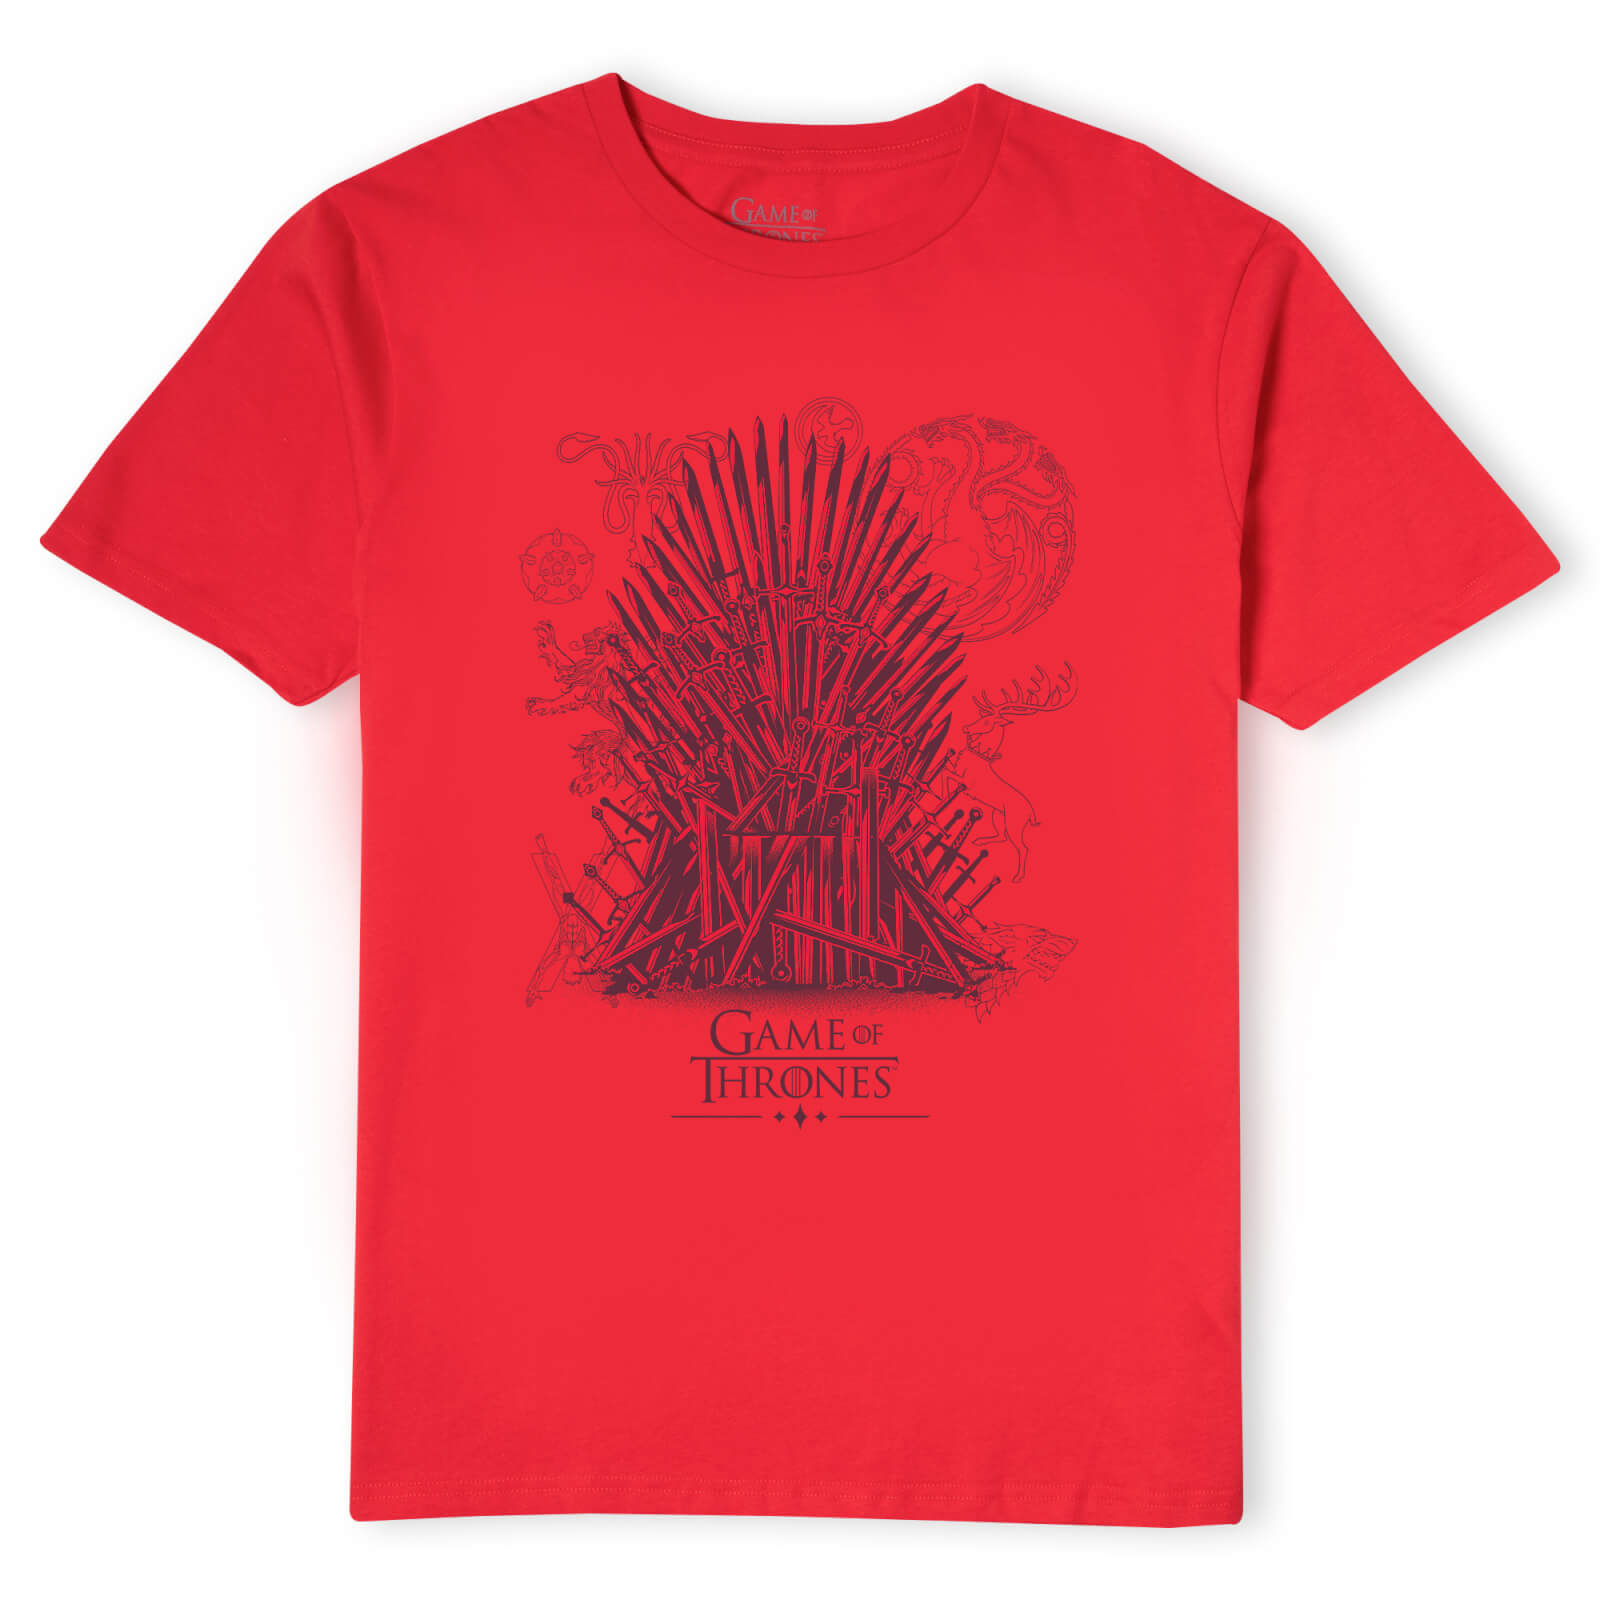 Game of Thrones The Iron Throne Men's T-Shirt - Red - XL - Red product